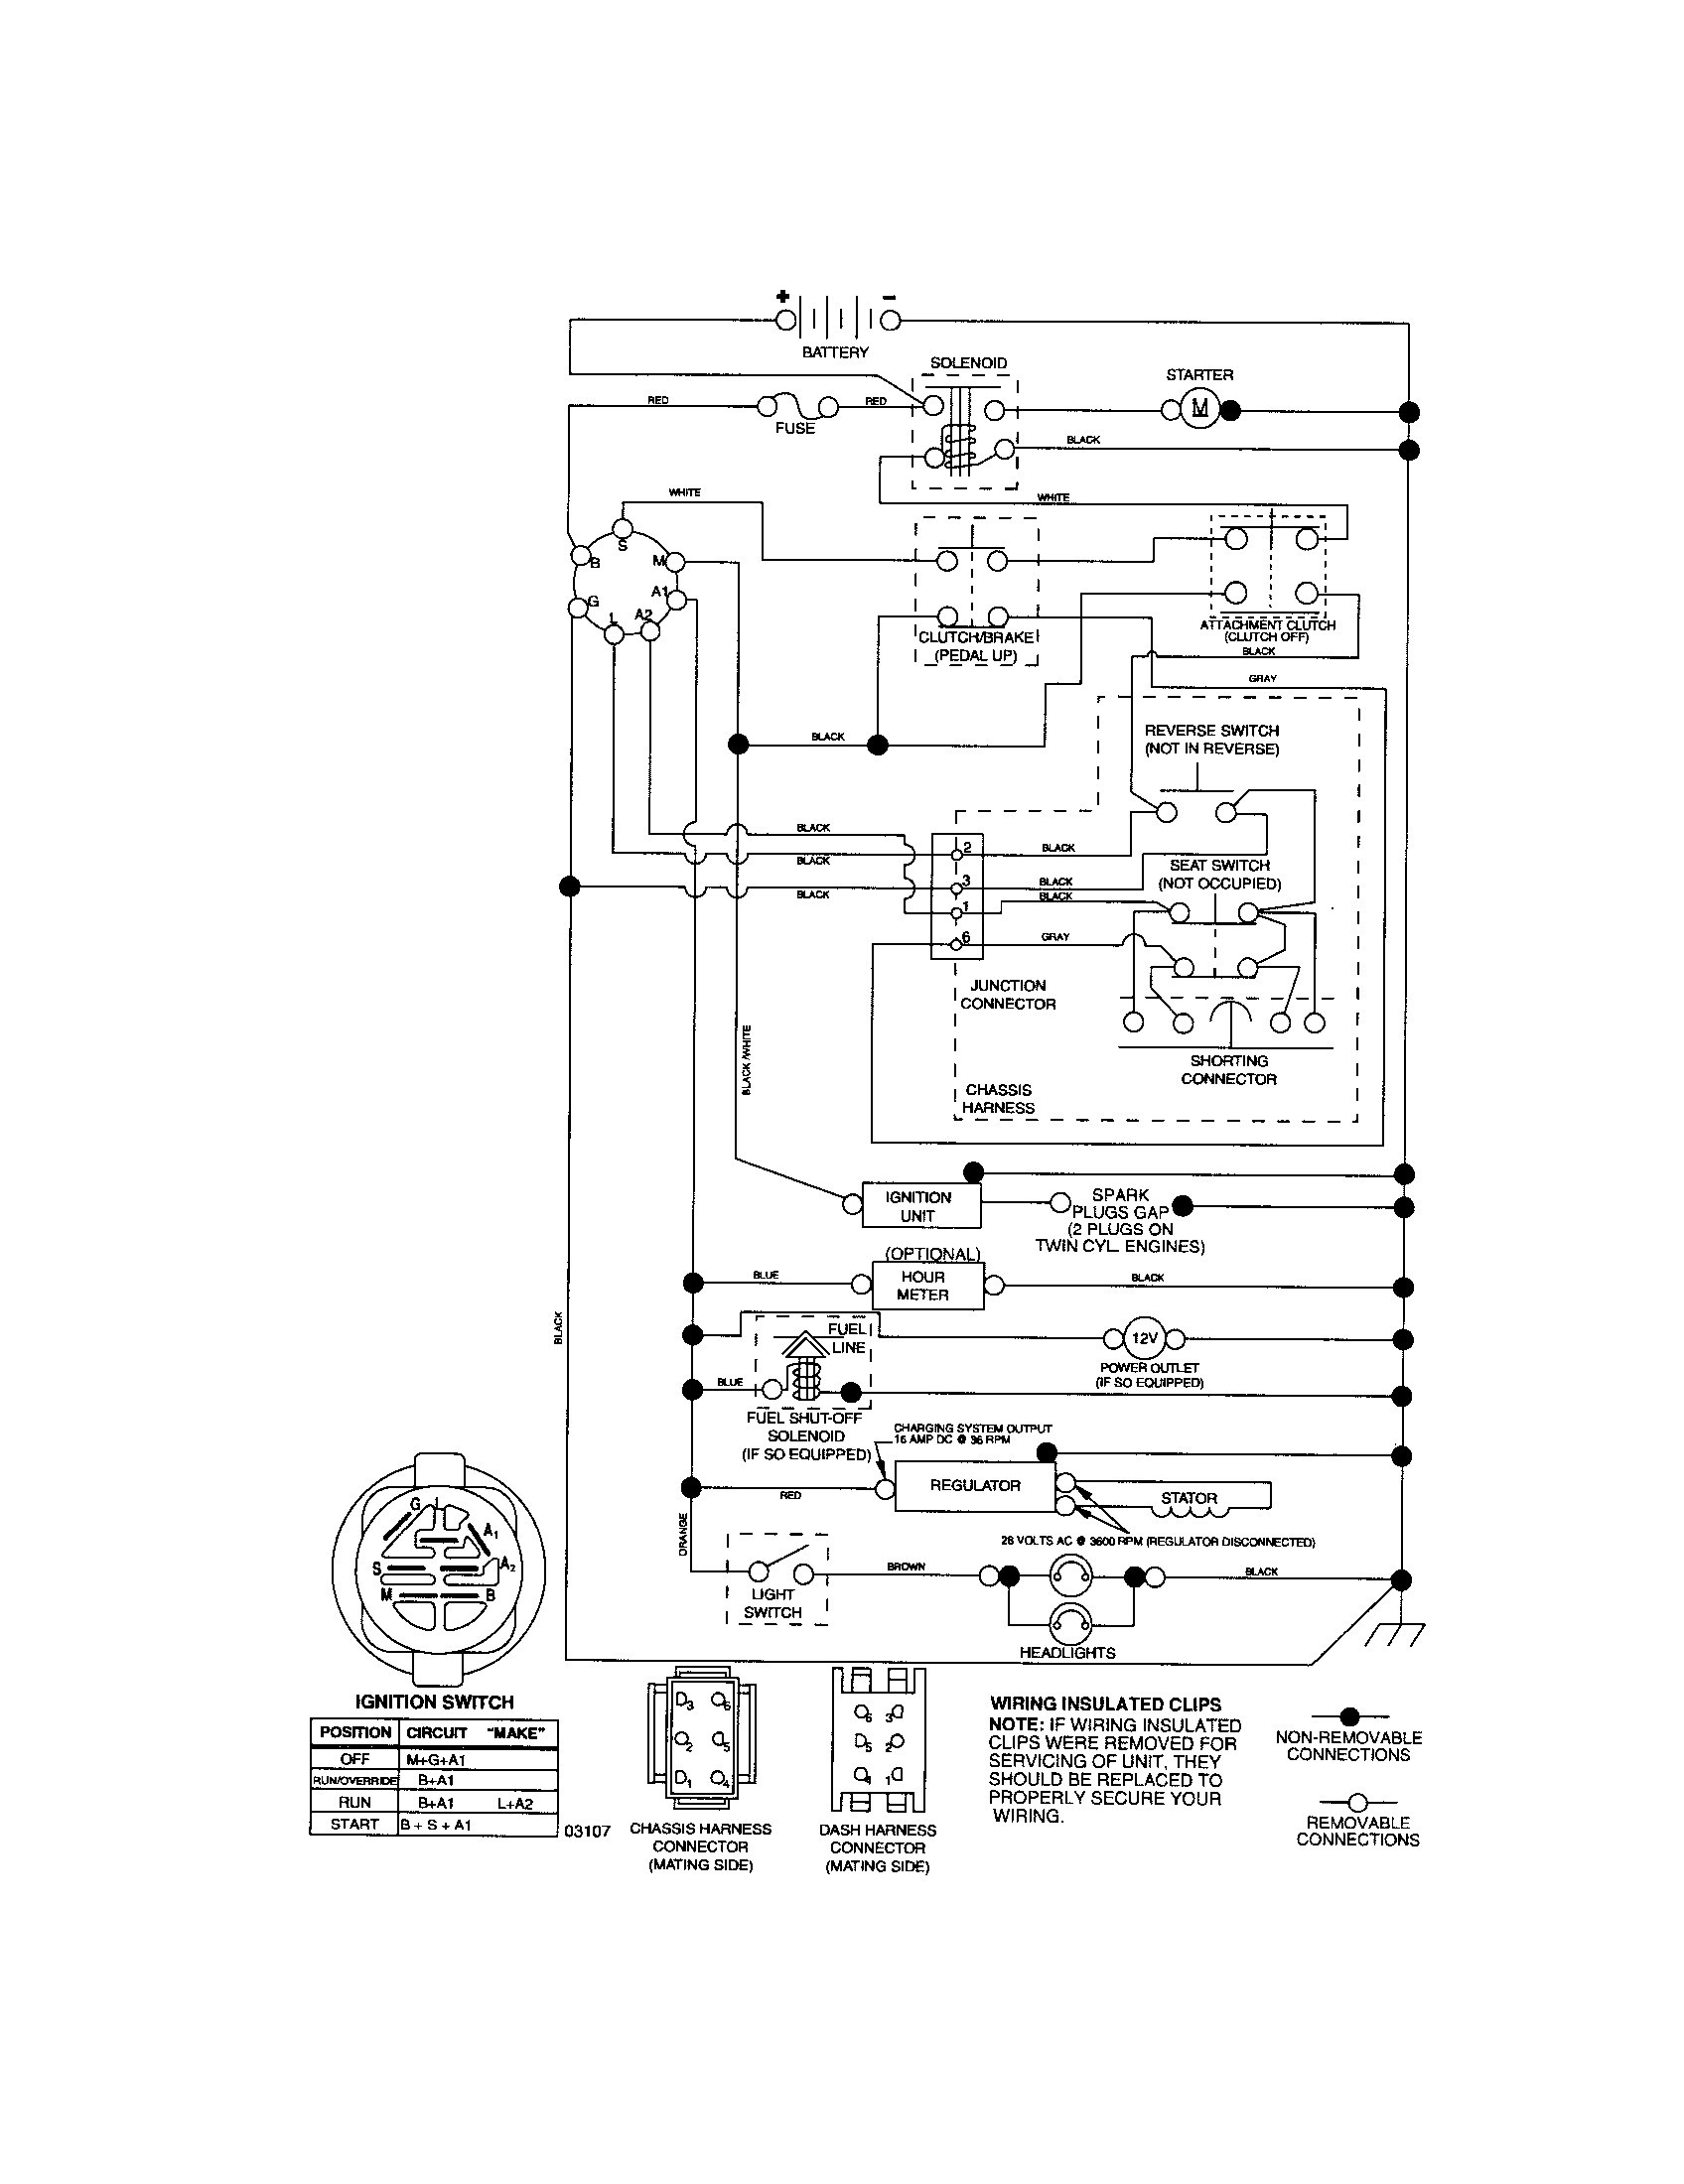 Wiring Diagram For Murray Ignition Switch Lawn Brilliant Riding Lawn Mower Ignition Switch Wiring Diagram Thoritsolutions Within